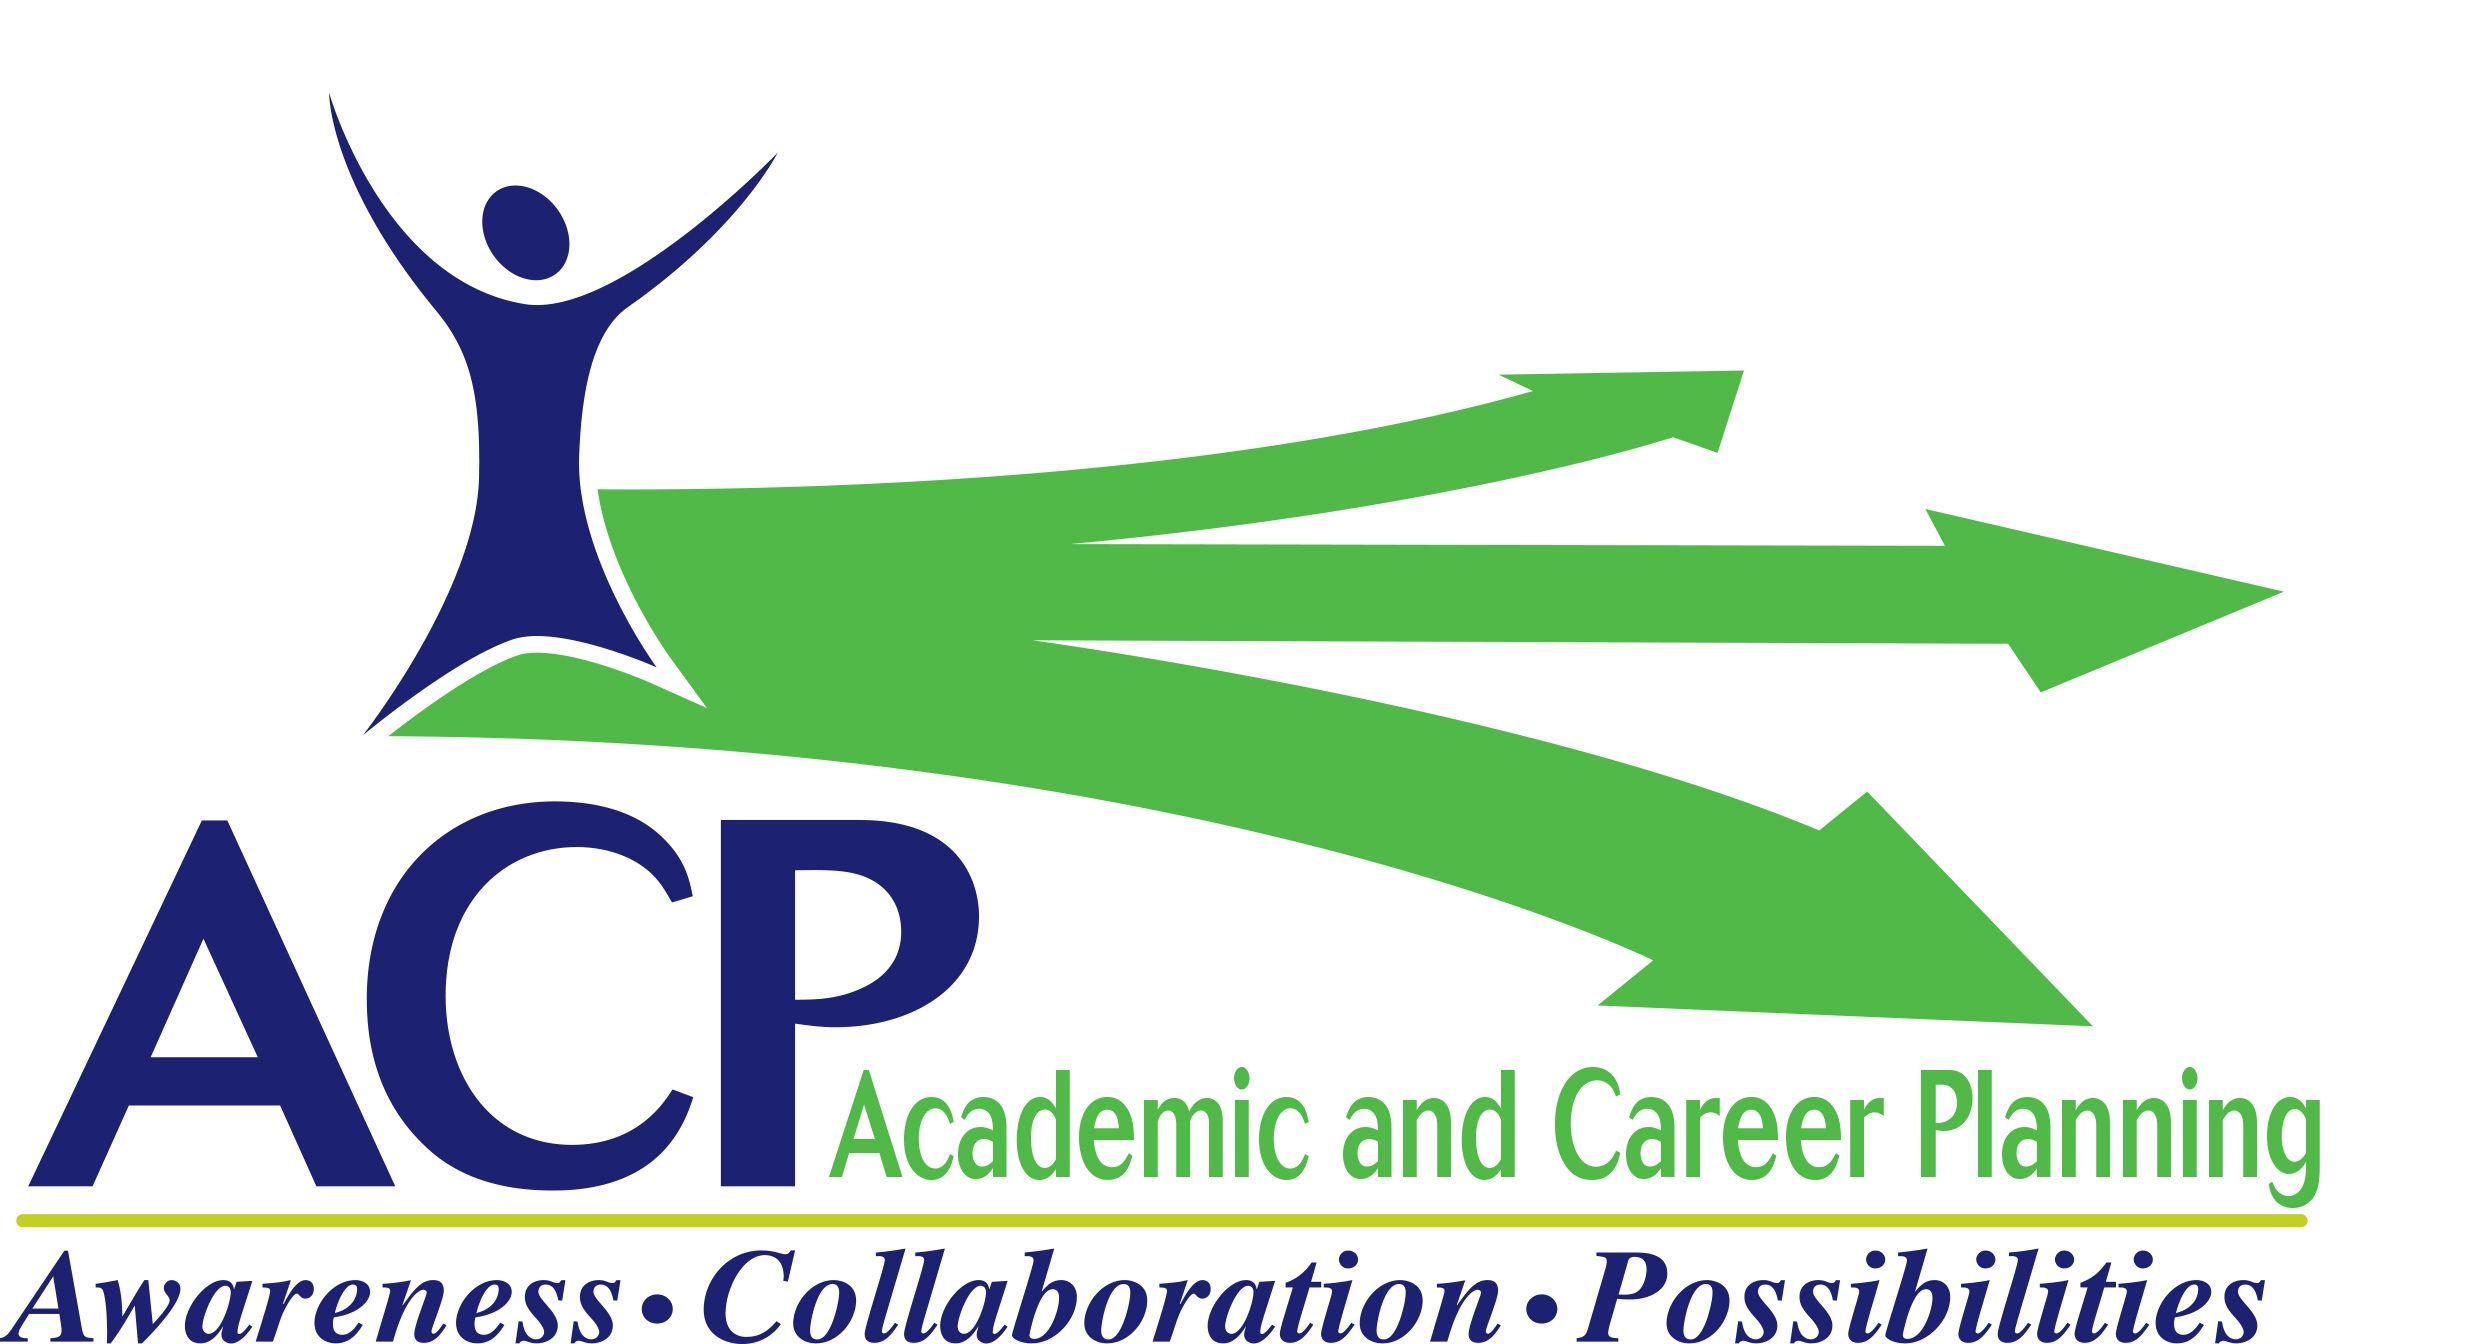 ACP Logo - Academic and Career Planning Bay Area Public School District